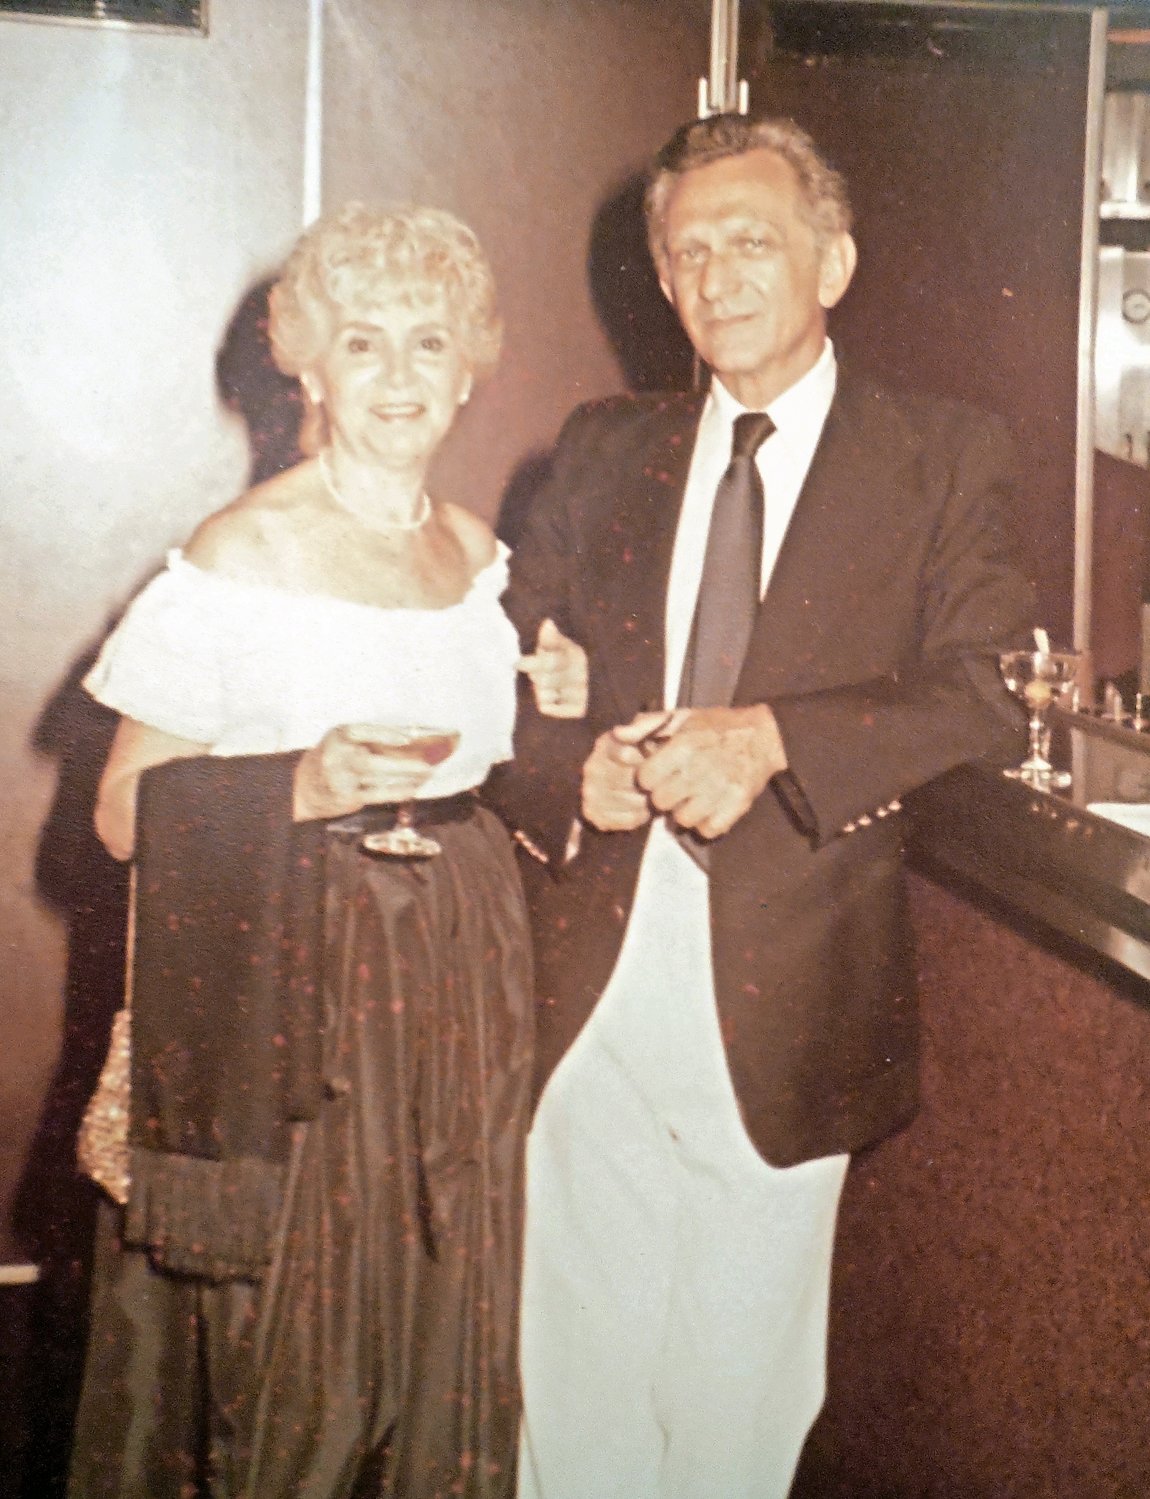 Nemser and his wife, Tess, moved to south Merrick in 1954 and remained there all their lives.